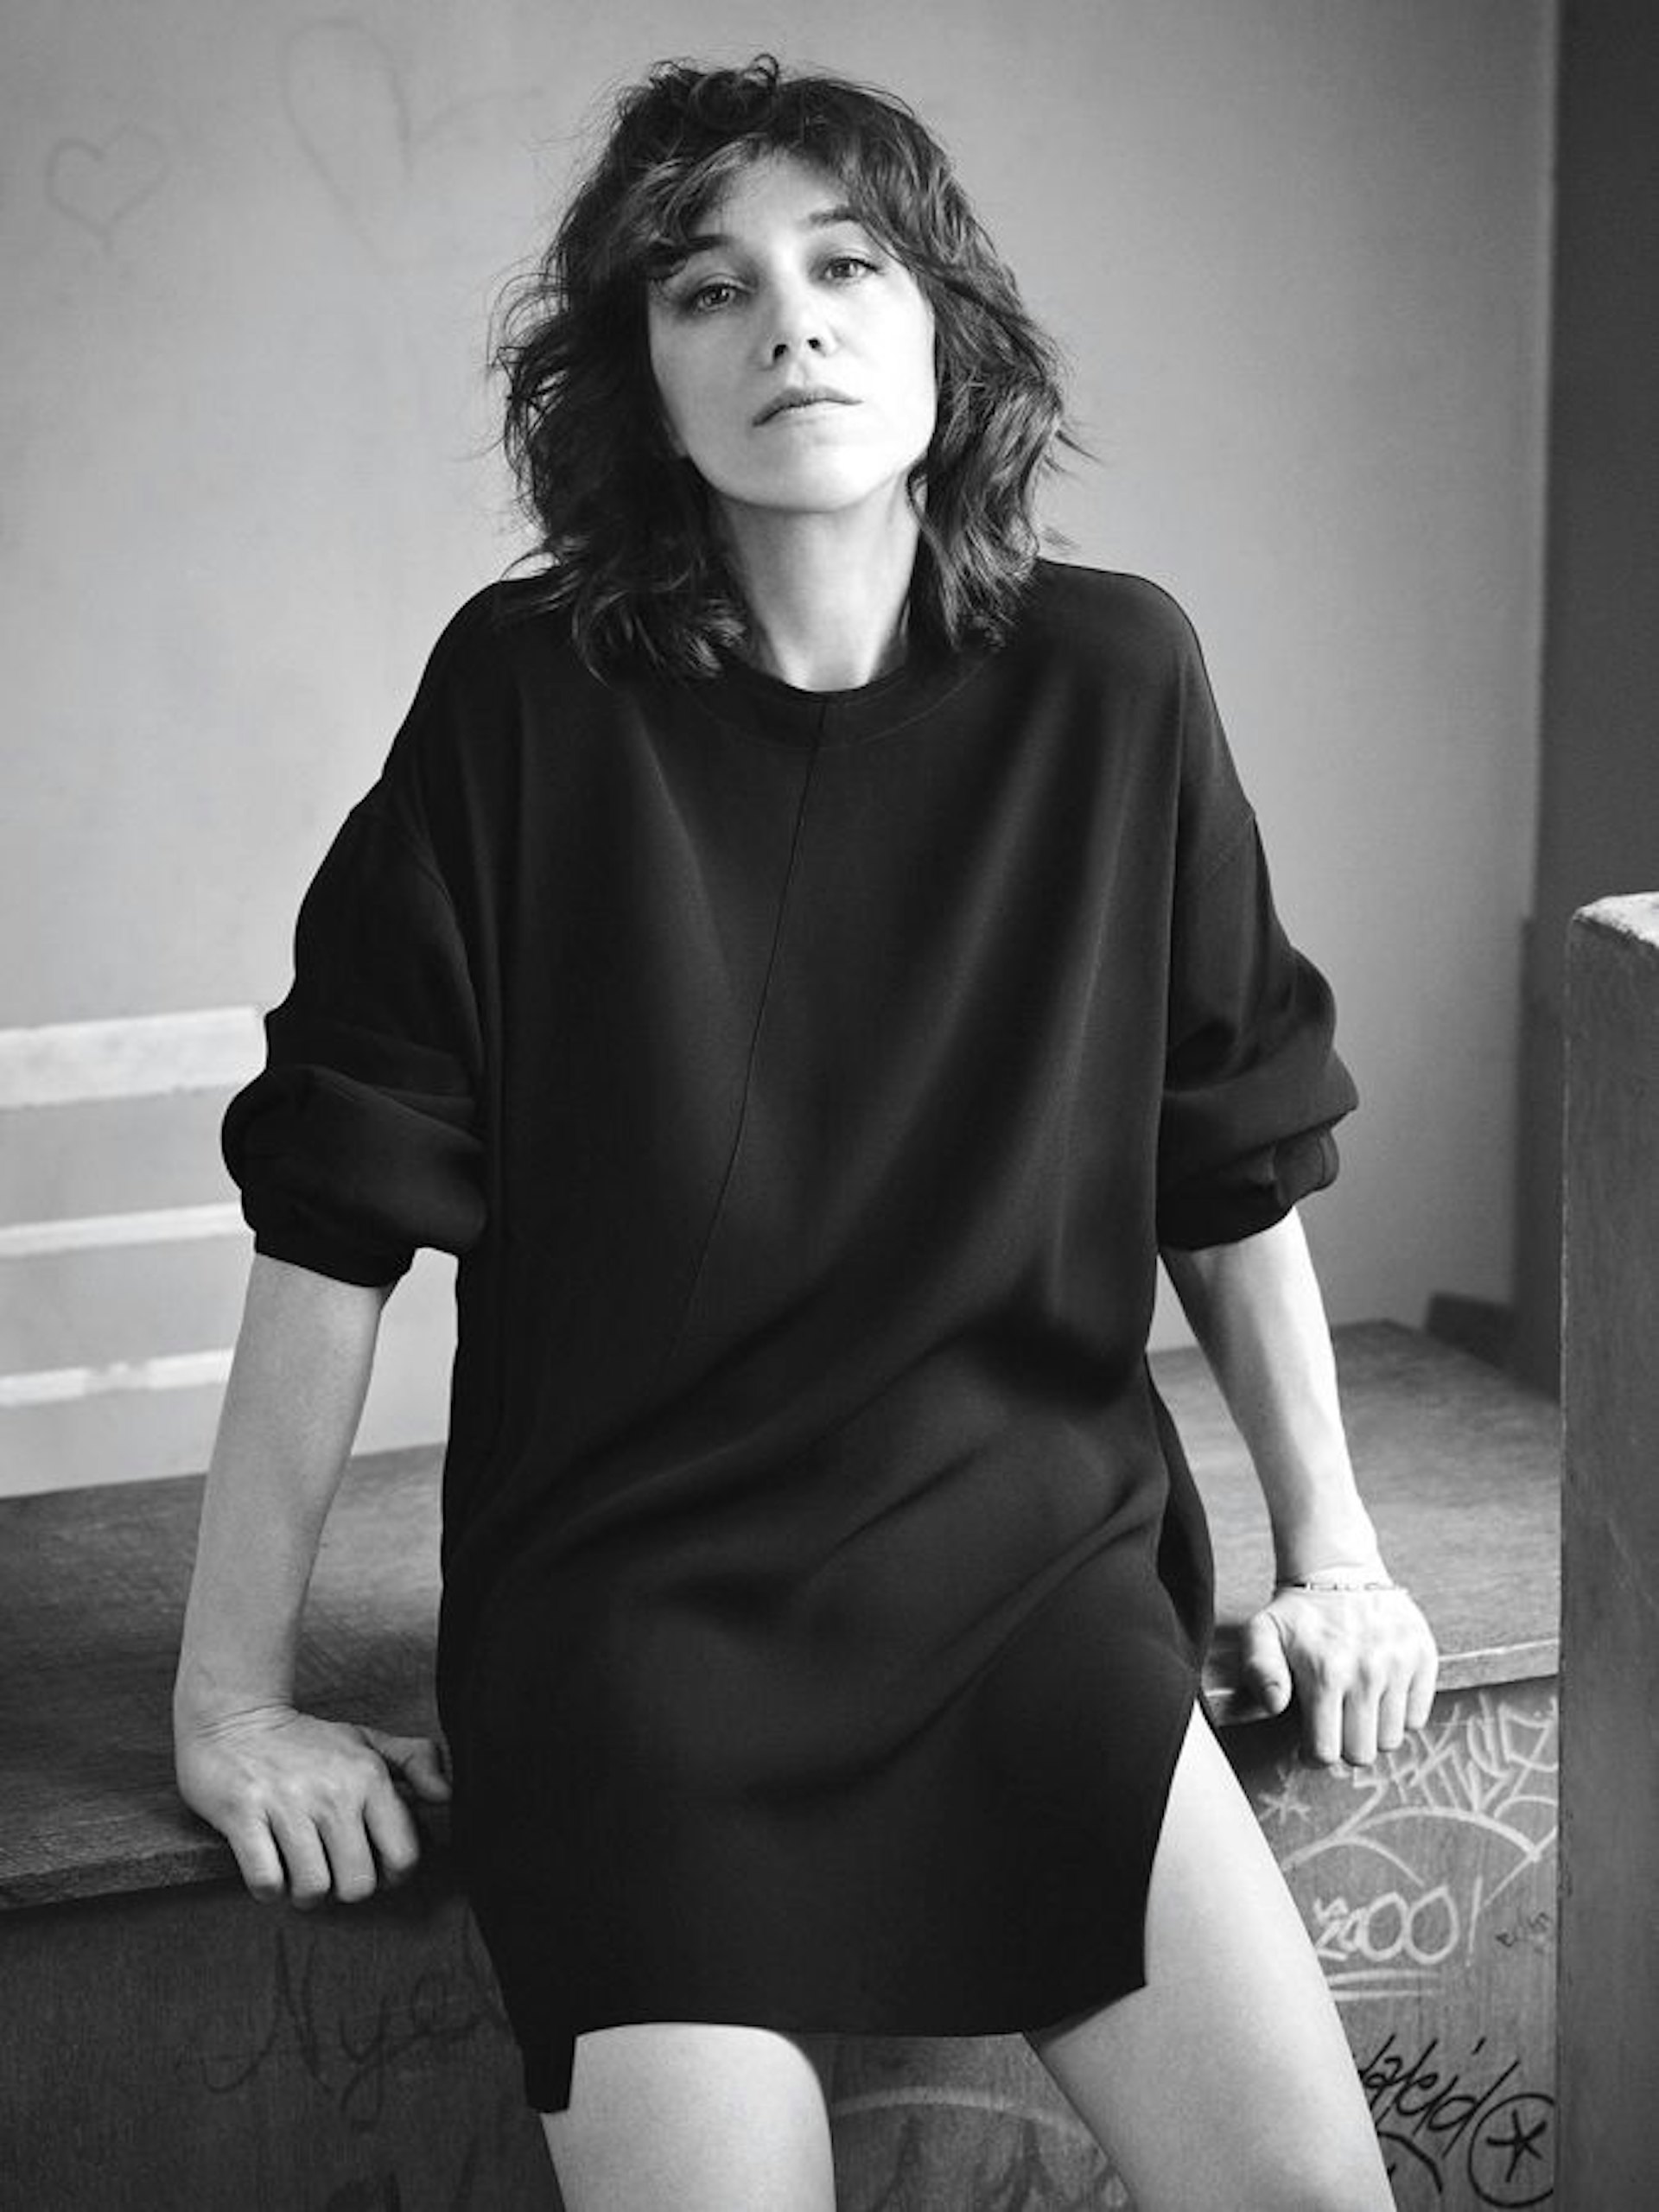 Picture of Charlotte Gainsbourg